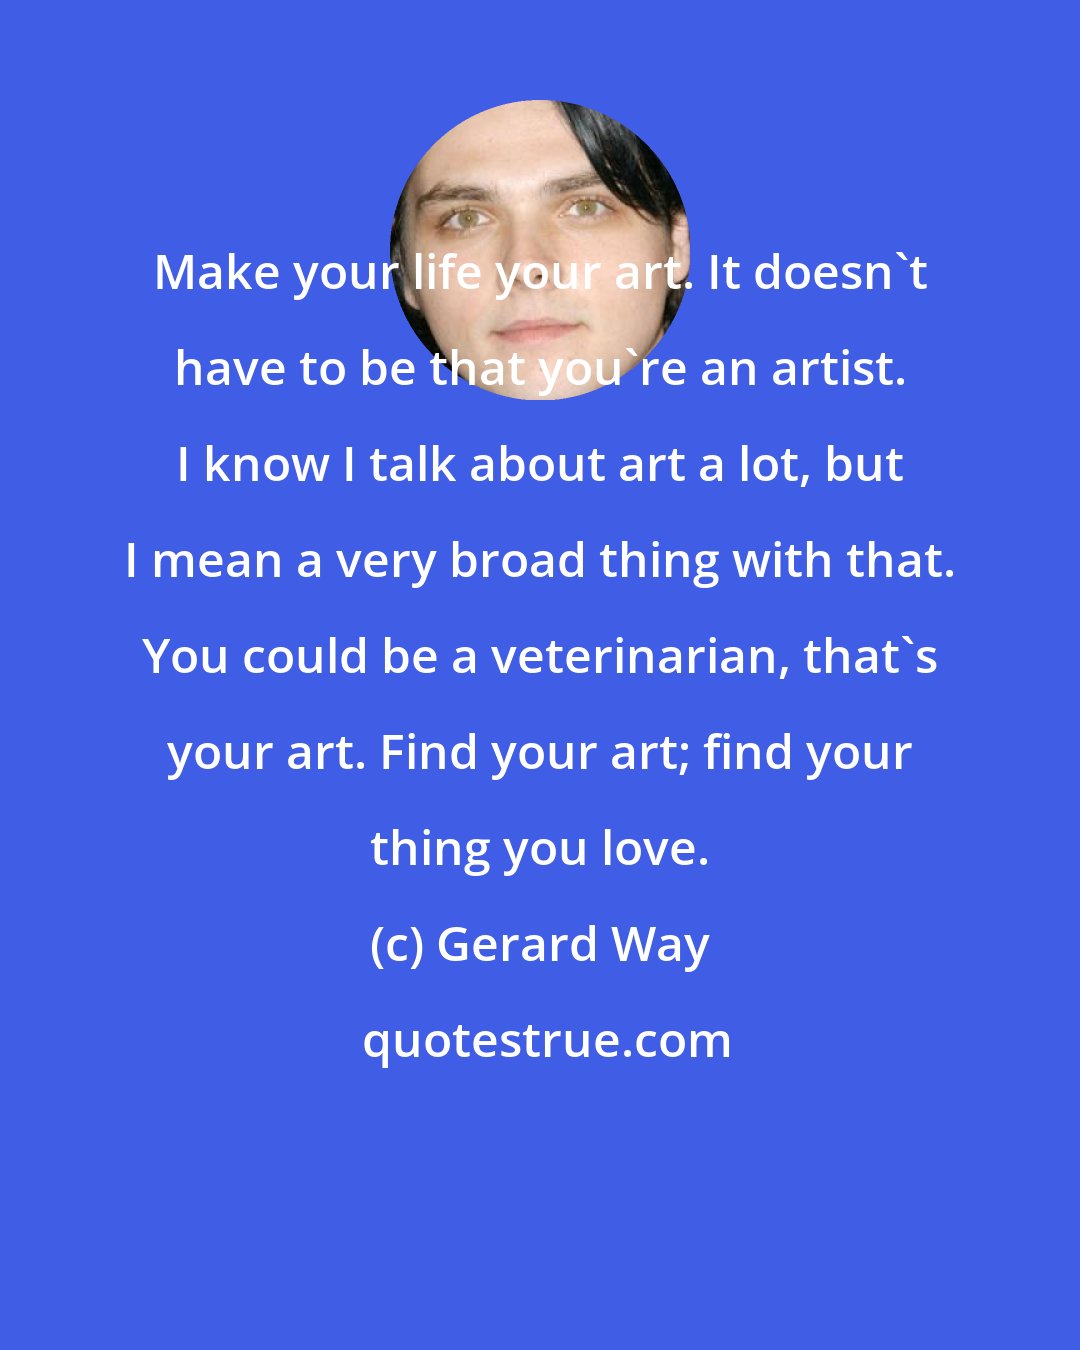 Gerard Way: Make your life your art. It doesn't have to be that you're an artist. I know I talk about art a lot, but I mean a very broad thing with that. You could be a veterinarian, that's your art. Find your art; find your thing you love.